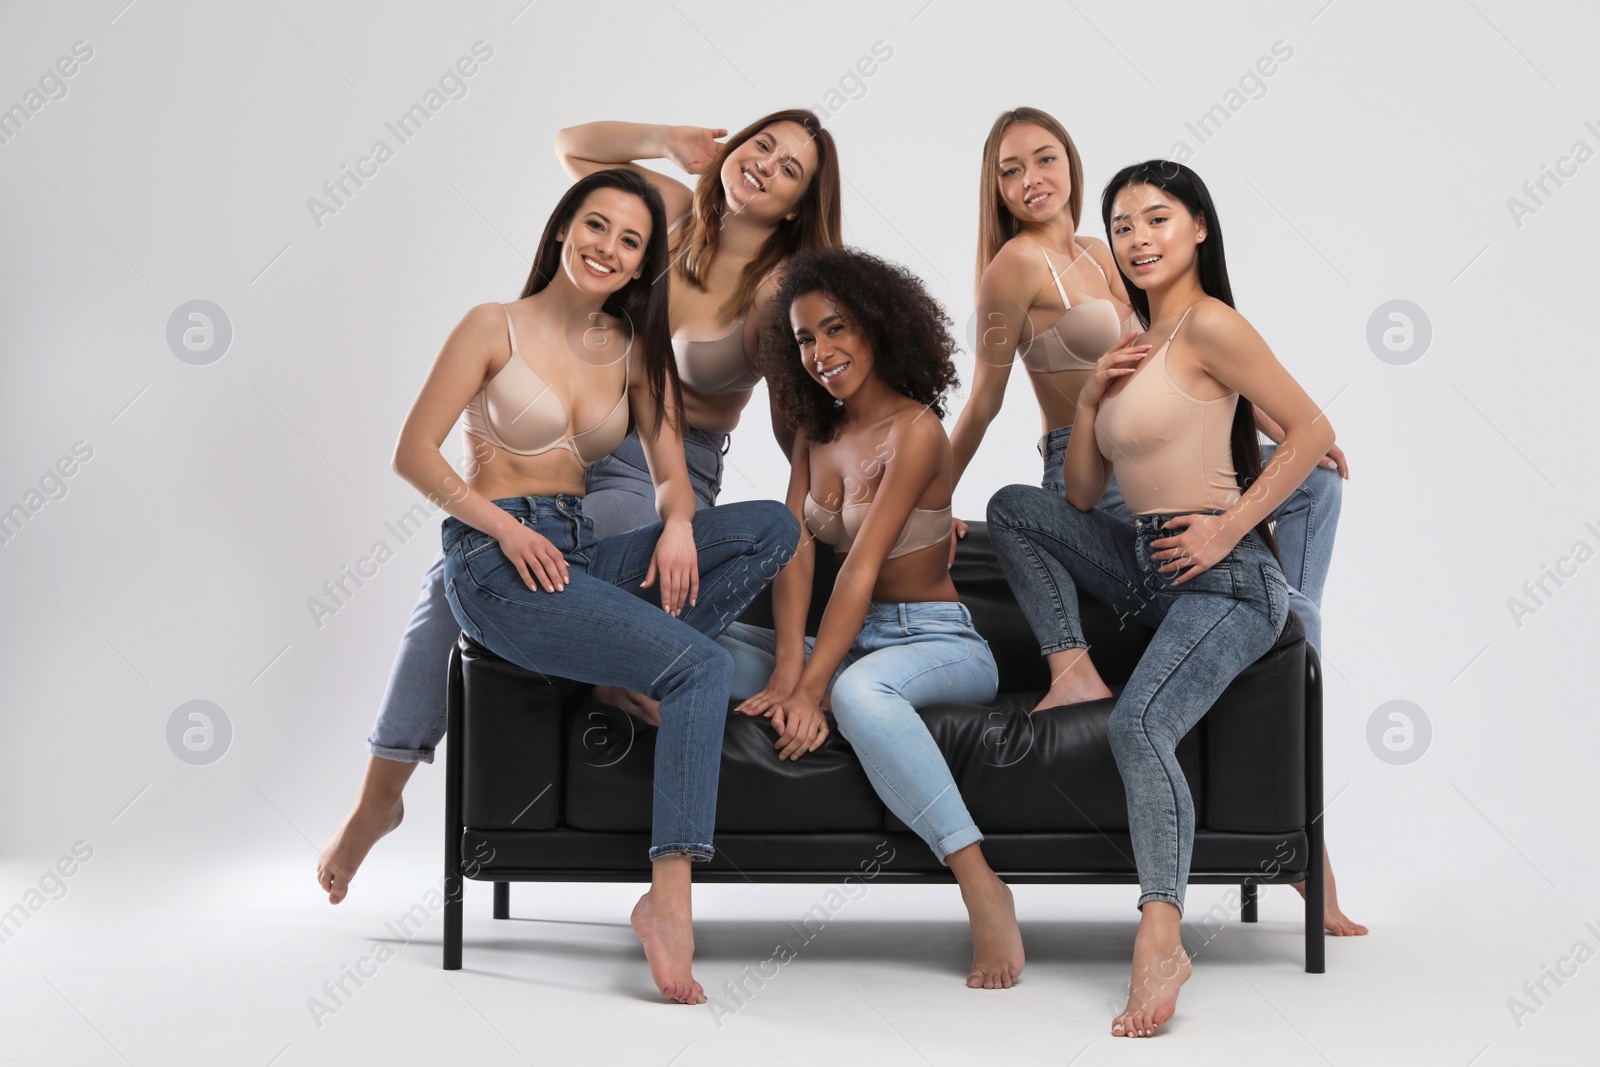 Photo of Group of women with different body types in jeans and underwear on sofa against light background